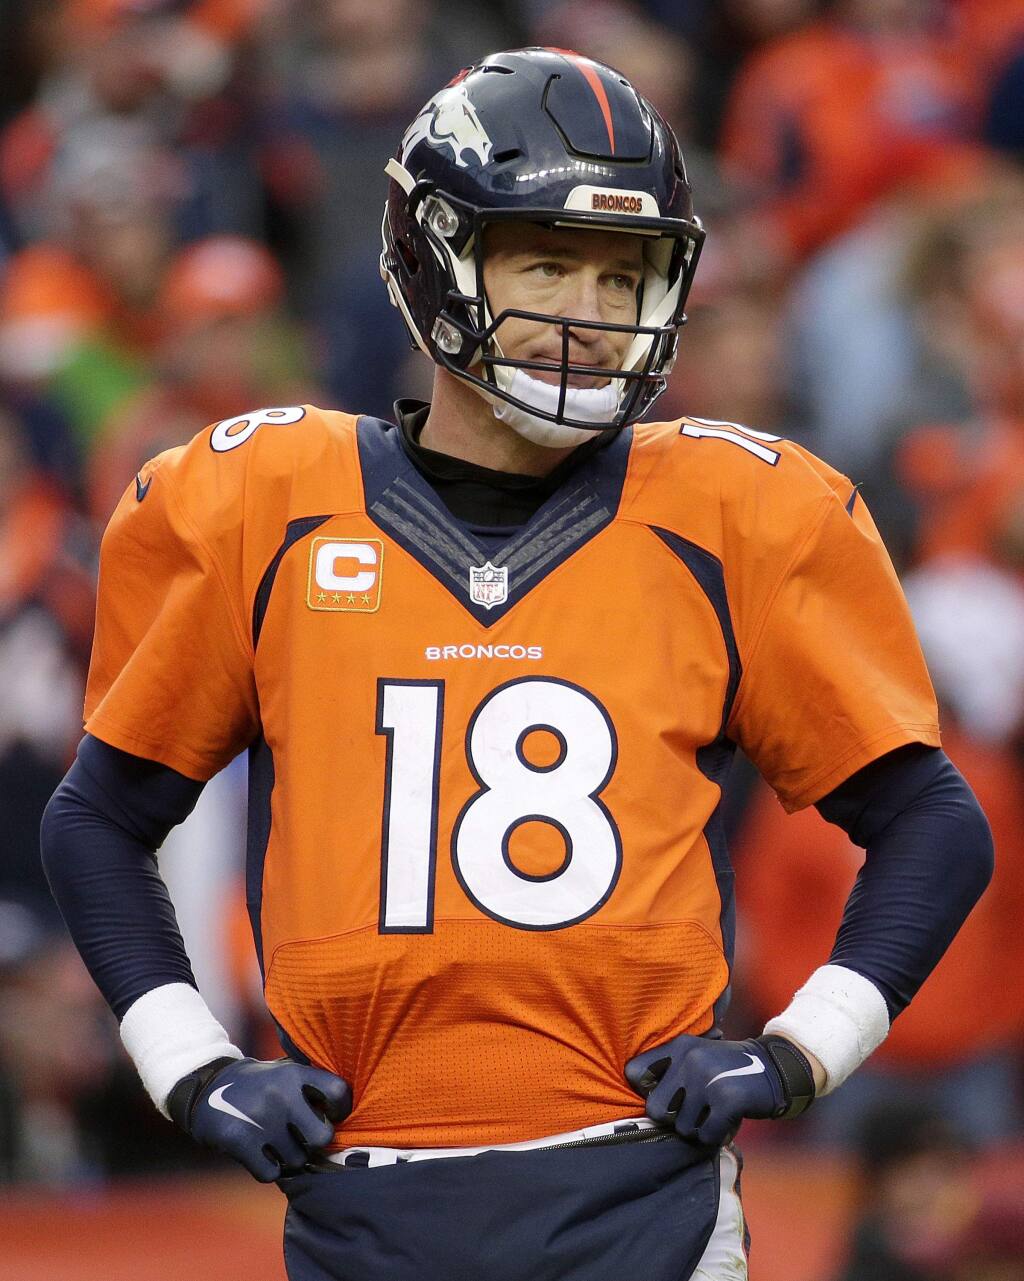 Peyton Manning and Cam Newton: Distinctly different and successful